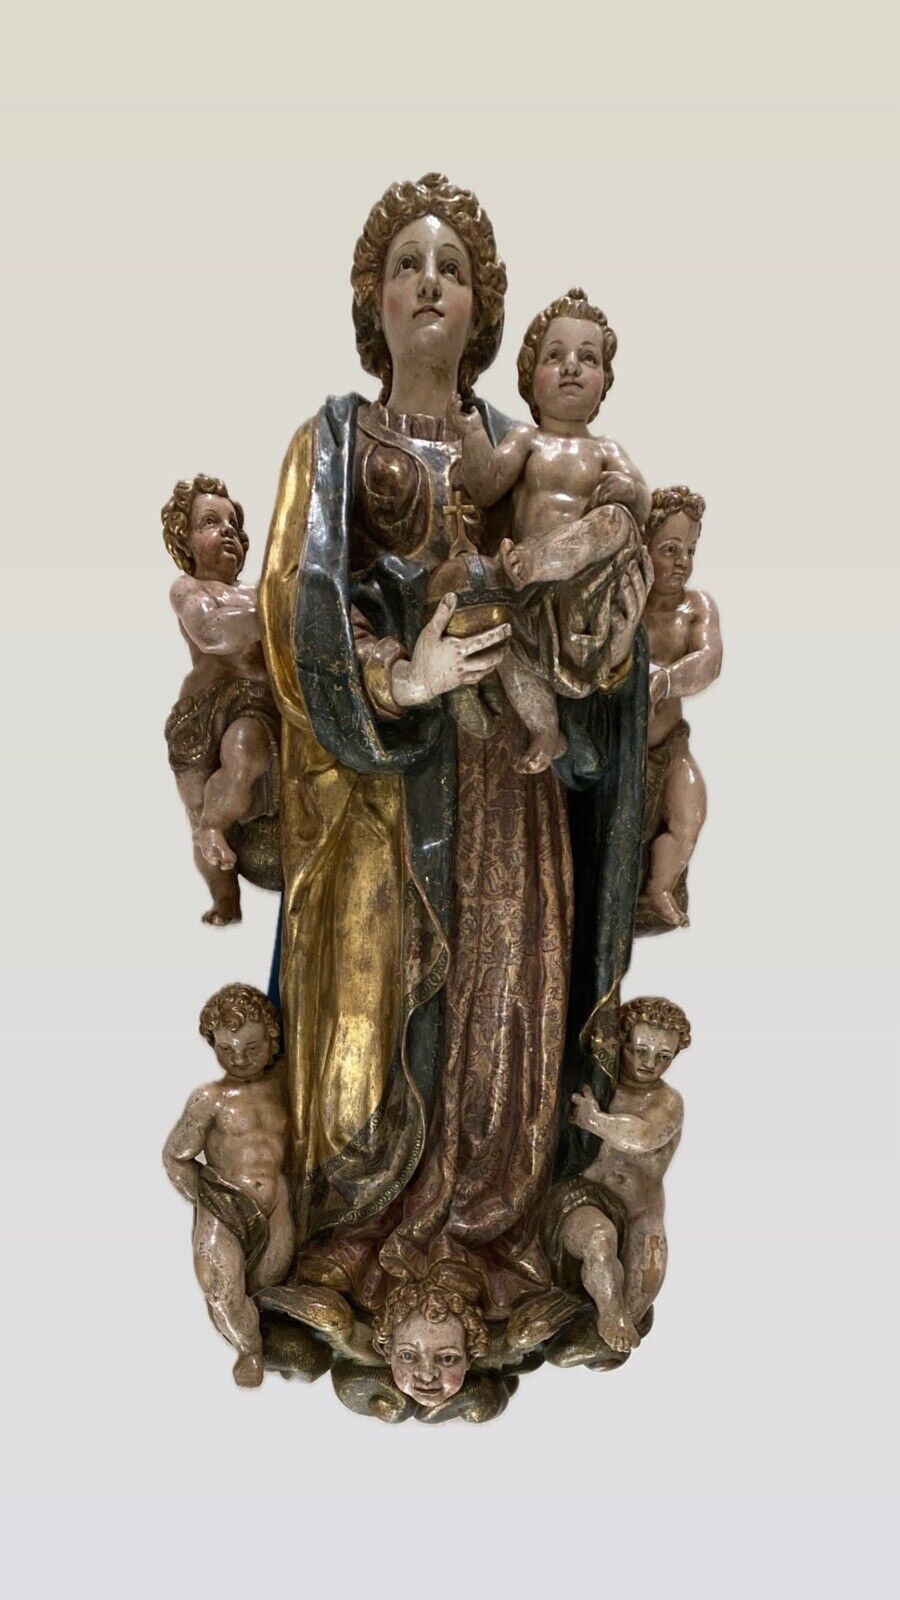 5 ft Monumental Antique Polychrome Painted Madonna & 5 Childs,Wood Carved Spain.